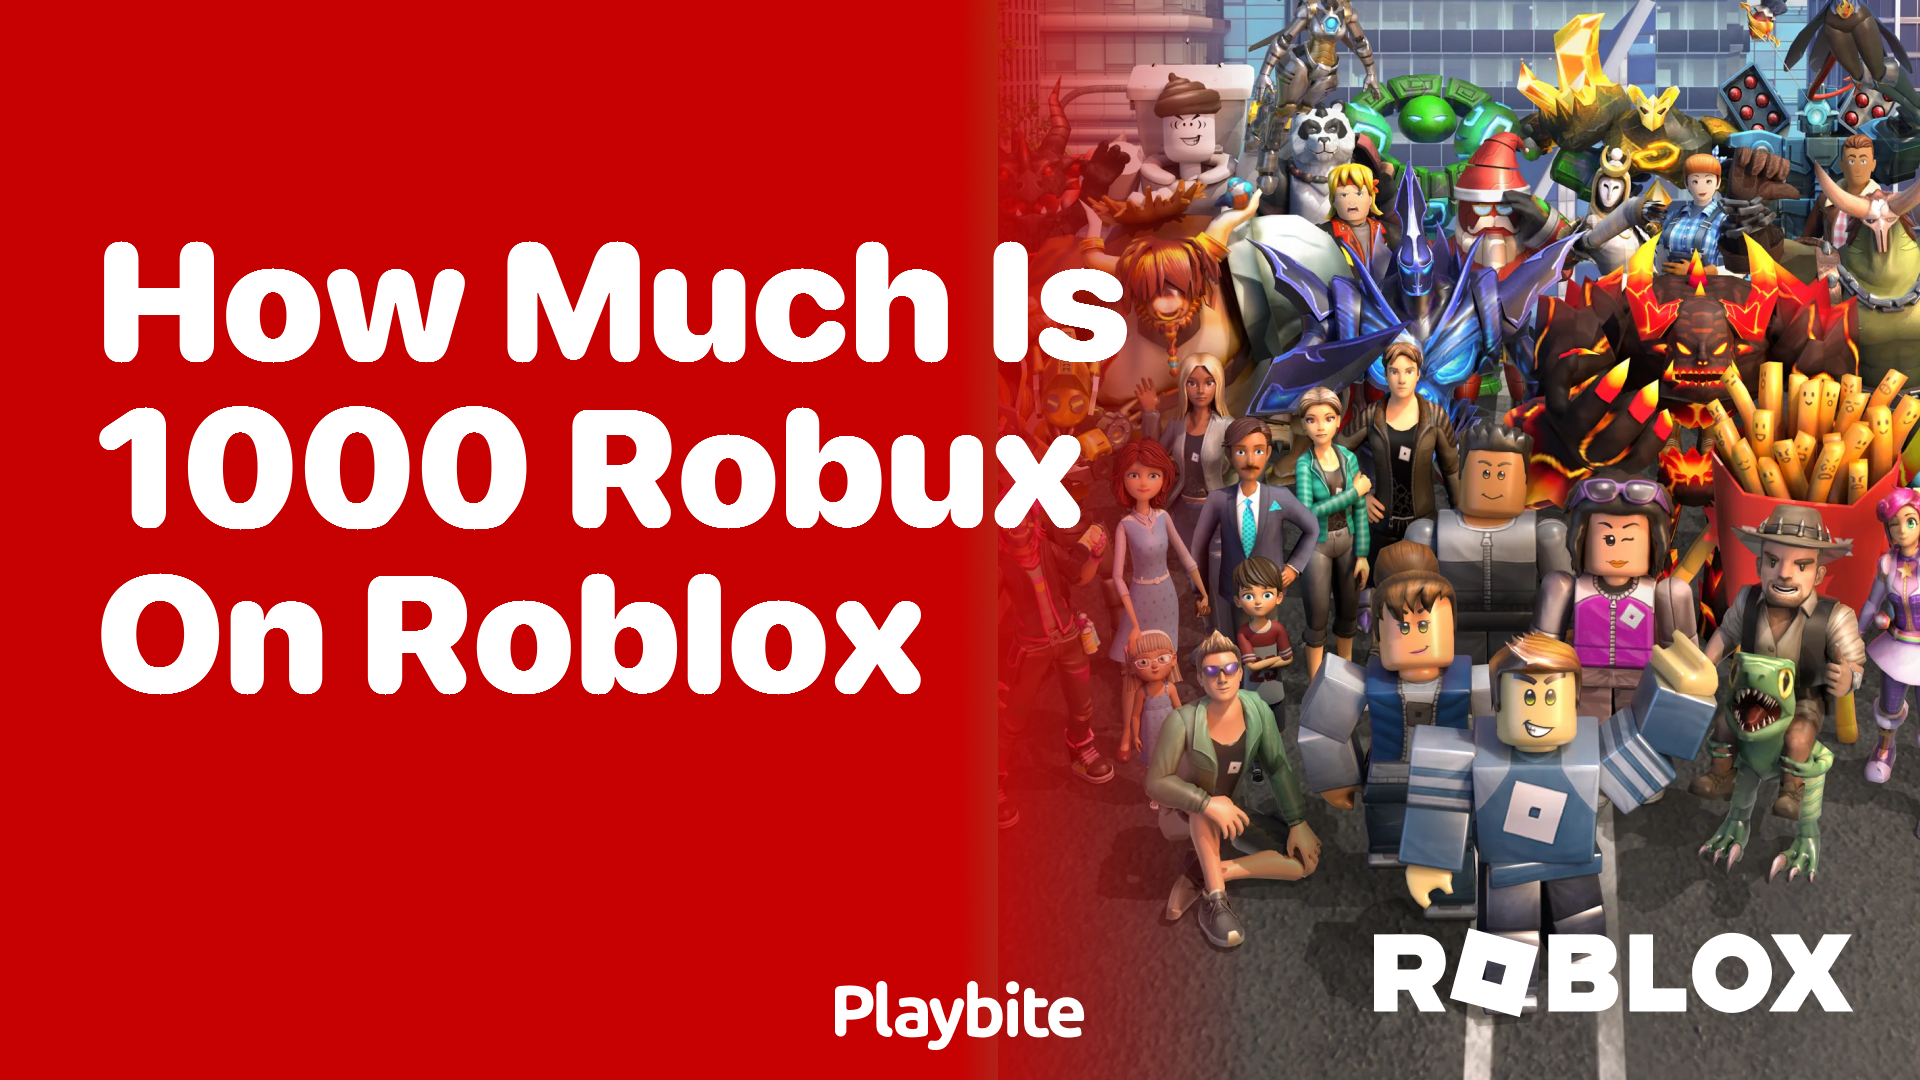 How Much is 1000 Robux on Roblox?